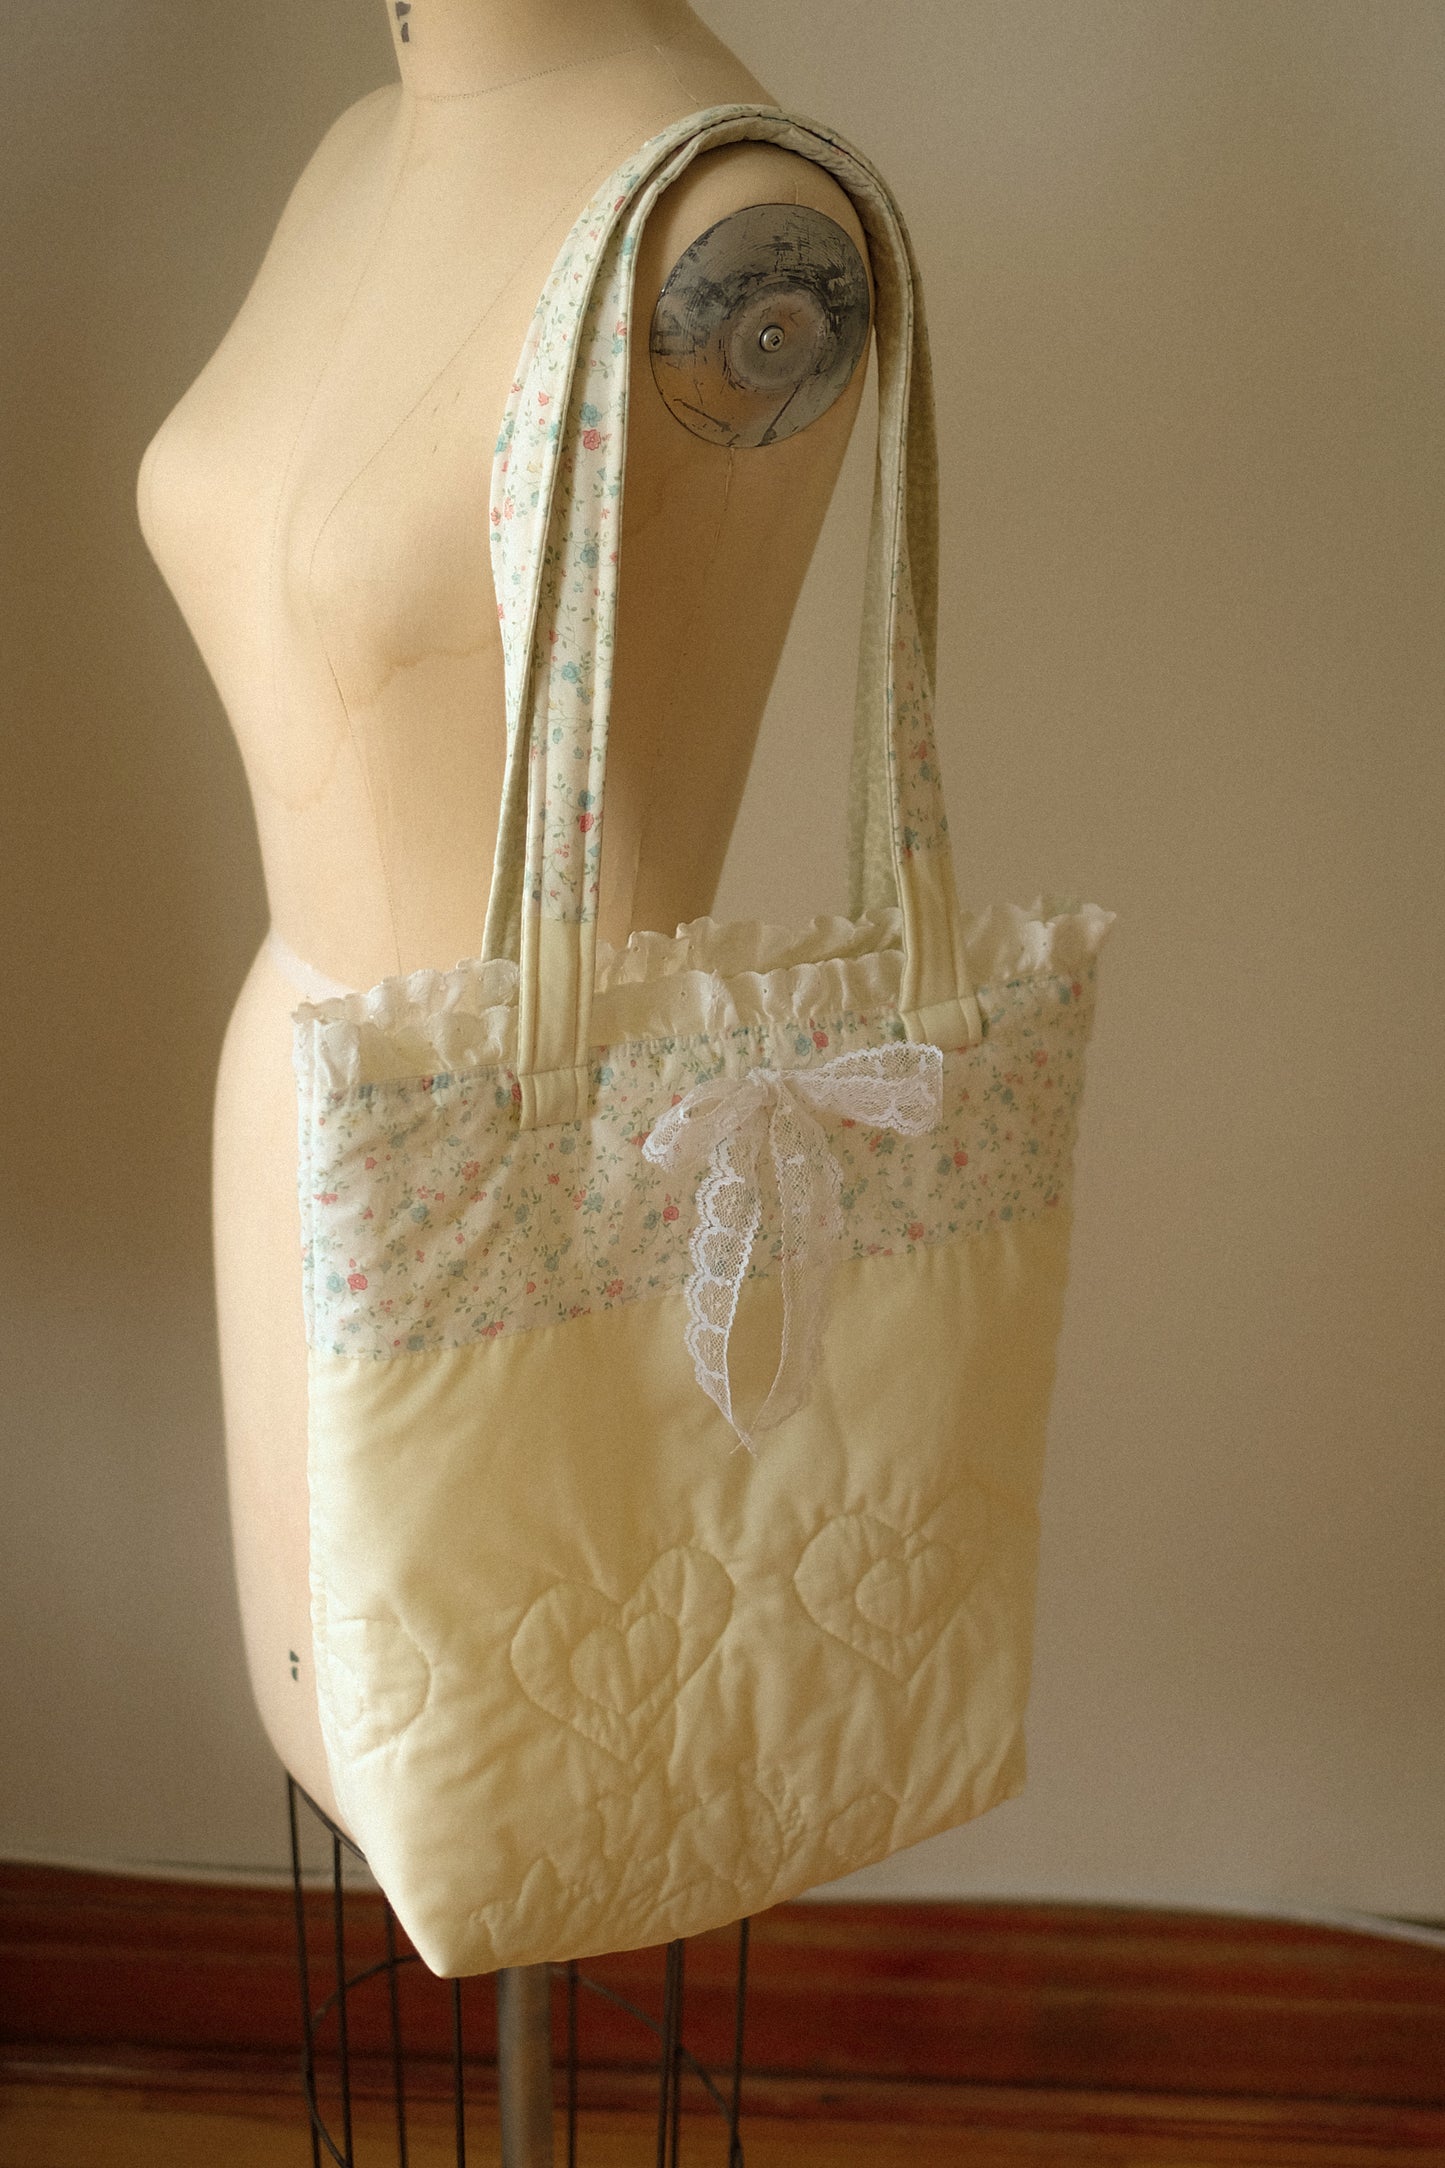 Handmade quilted tote bag - Lover ♡